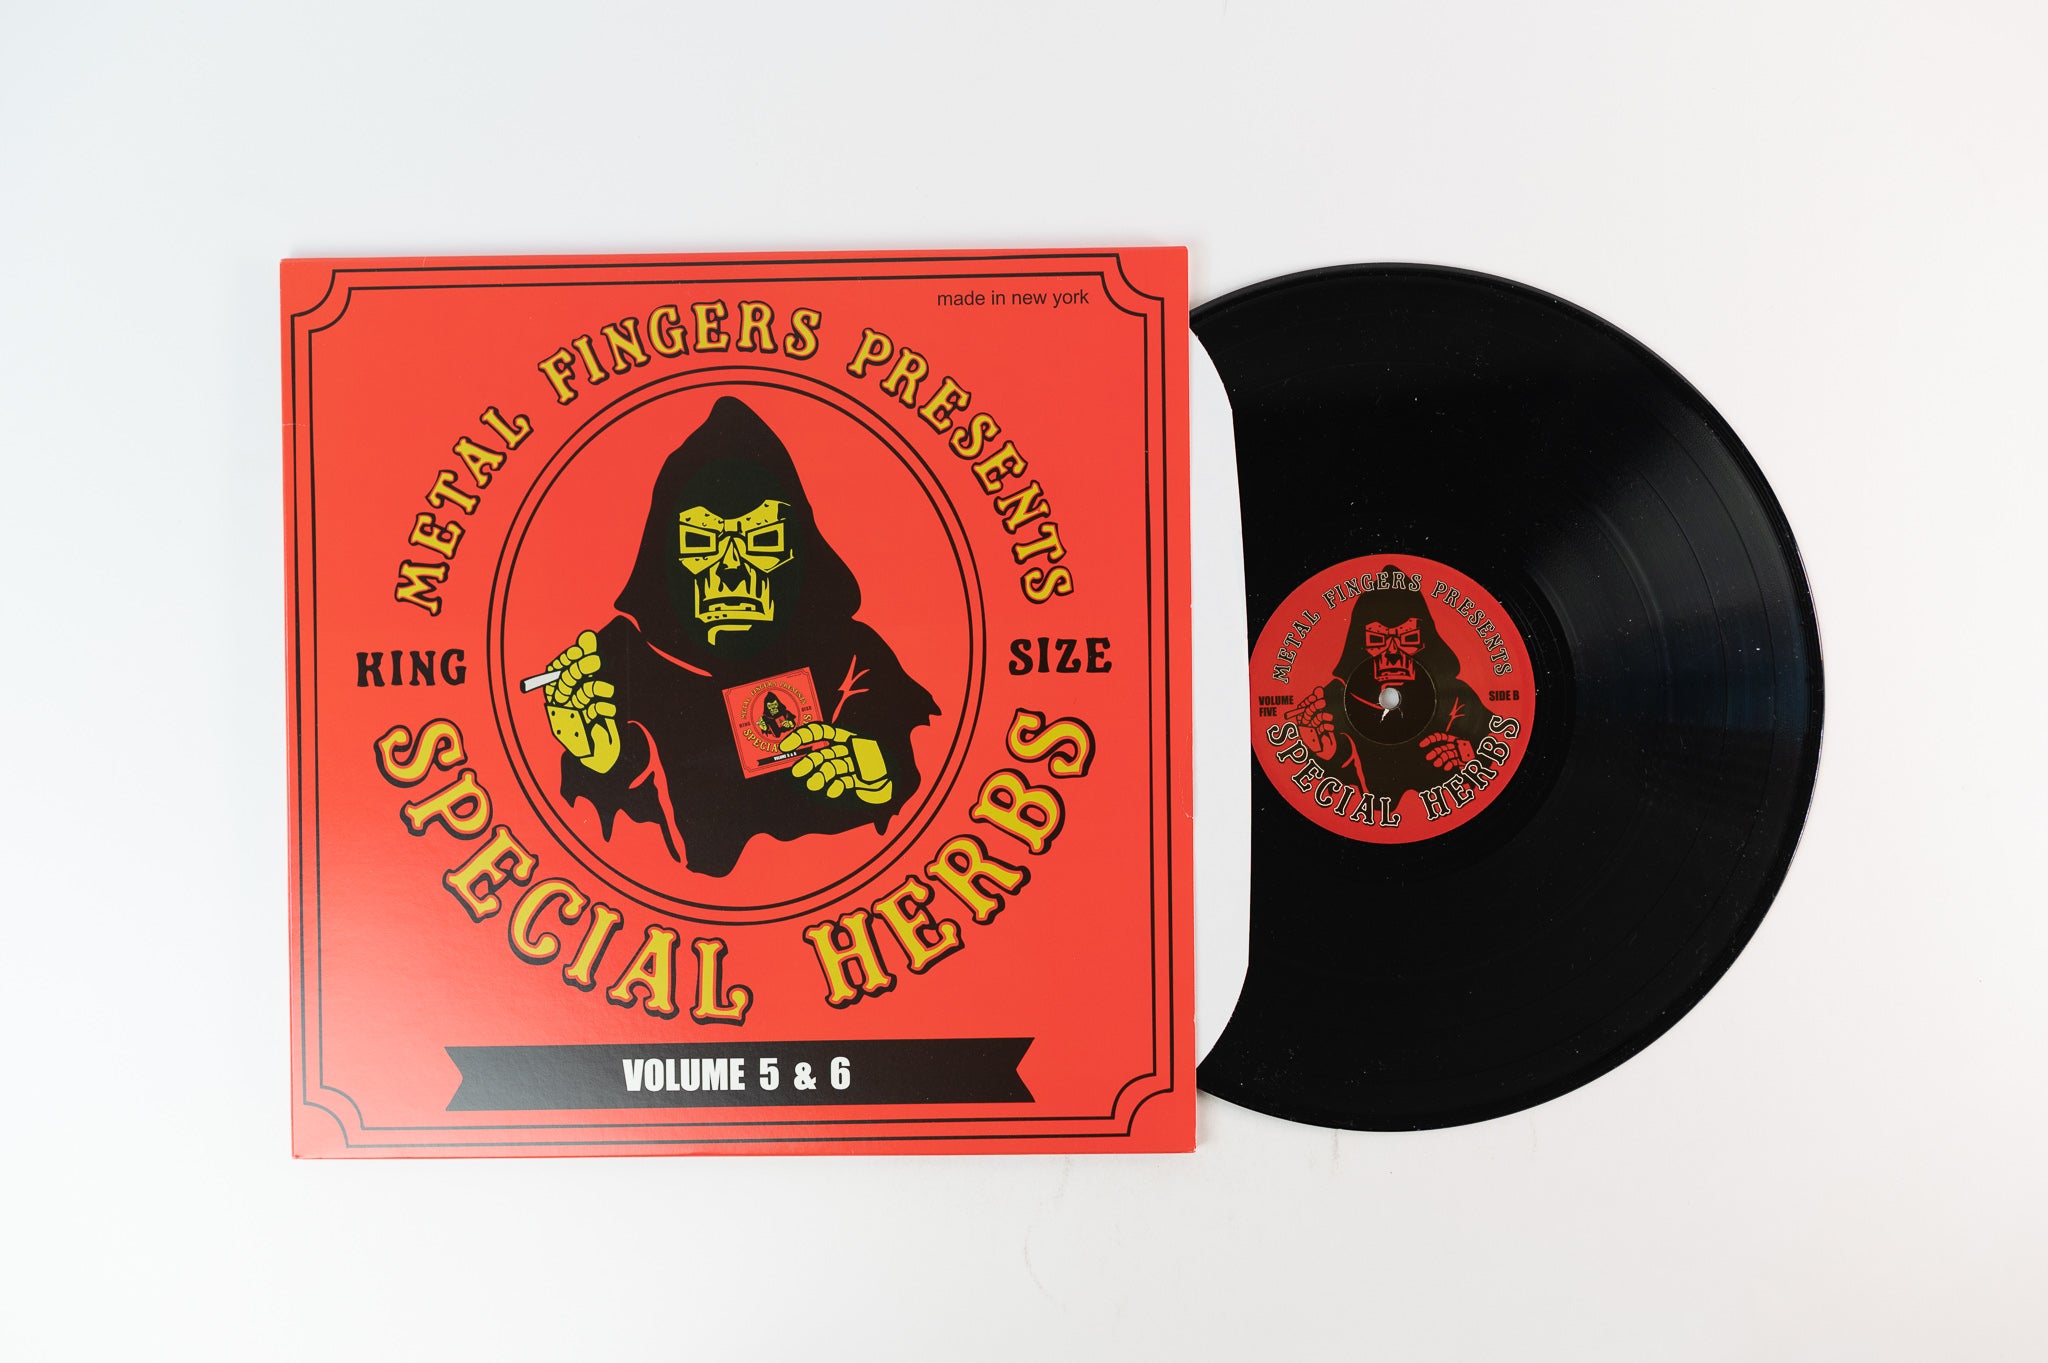 Metal Fingers - Special Herbs Volume 5 & 6 on Natural Sounds Limited Edition Reissue